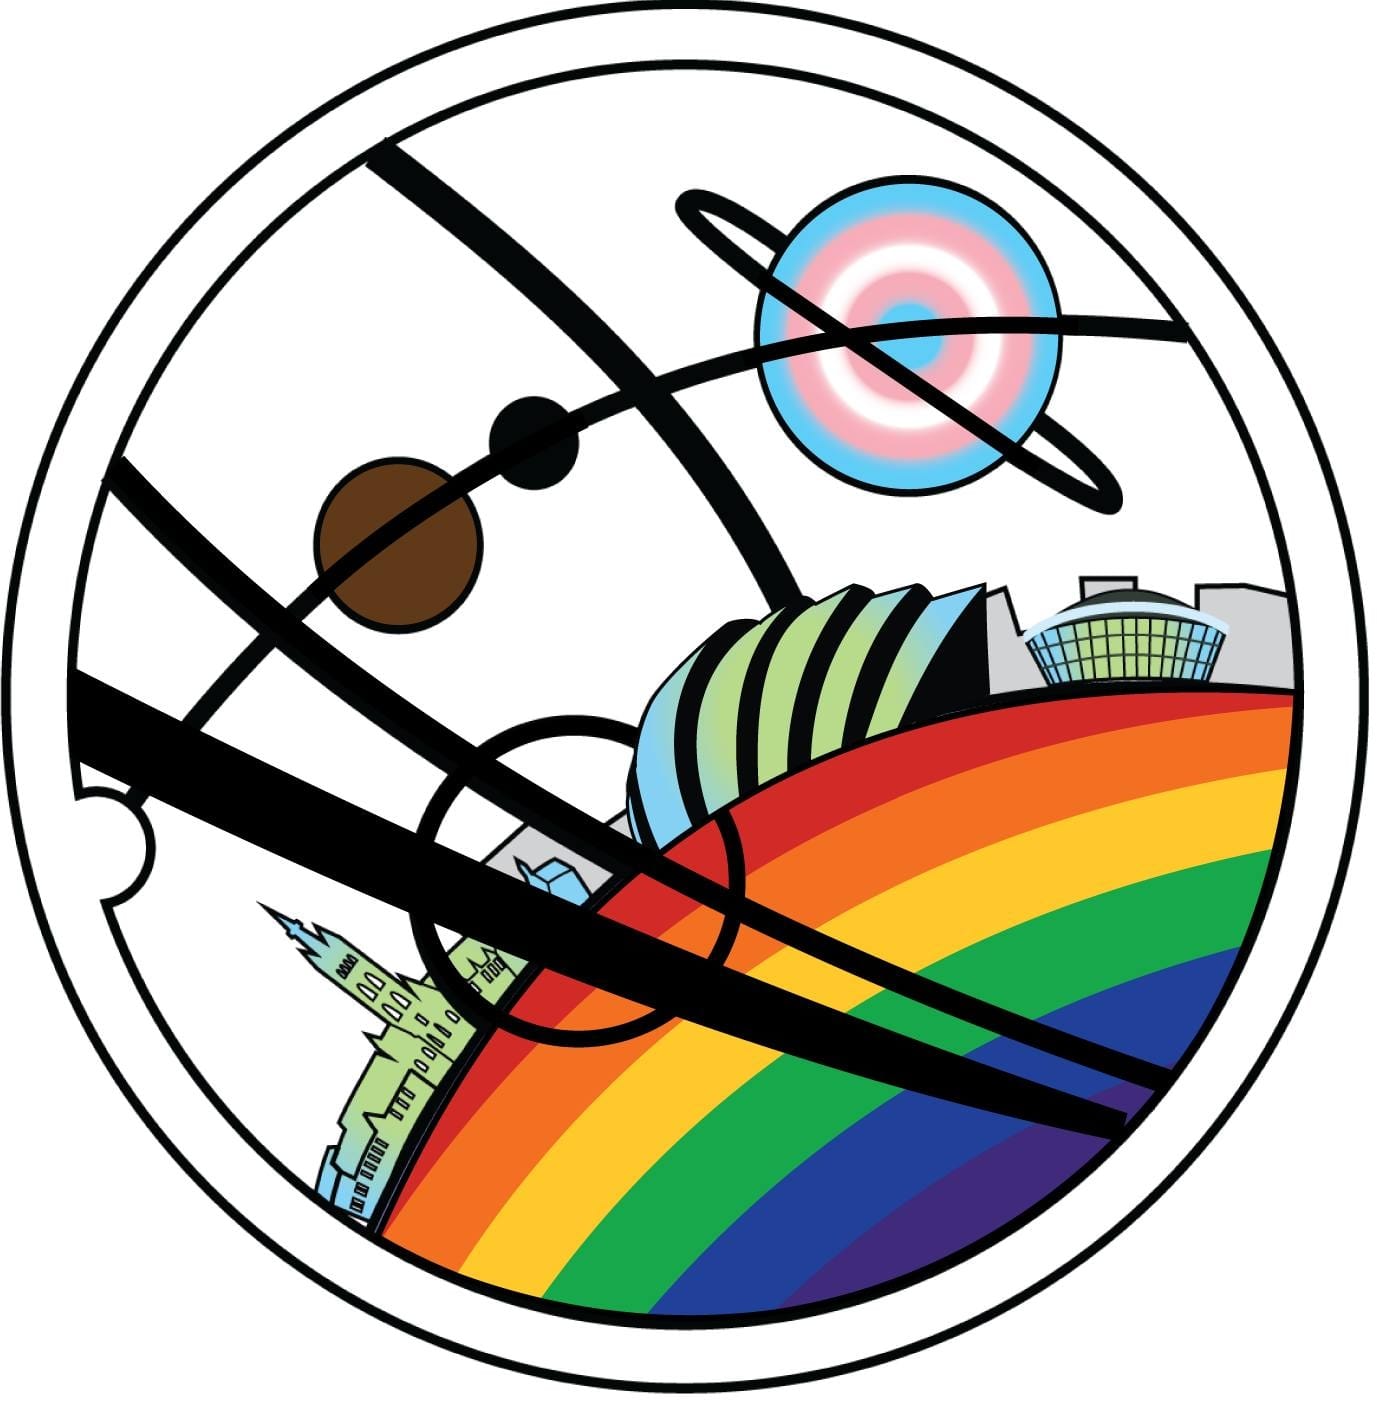 A rainbow flag as the ground with the skyline of Glasgow atop it and planets overhead, including one with the trans flag colors. 